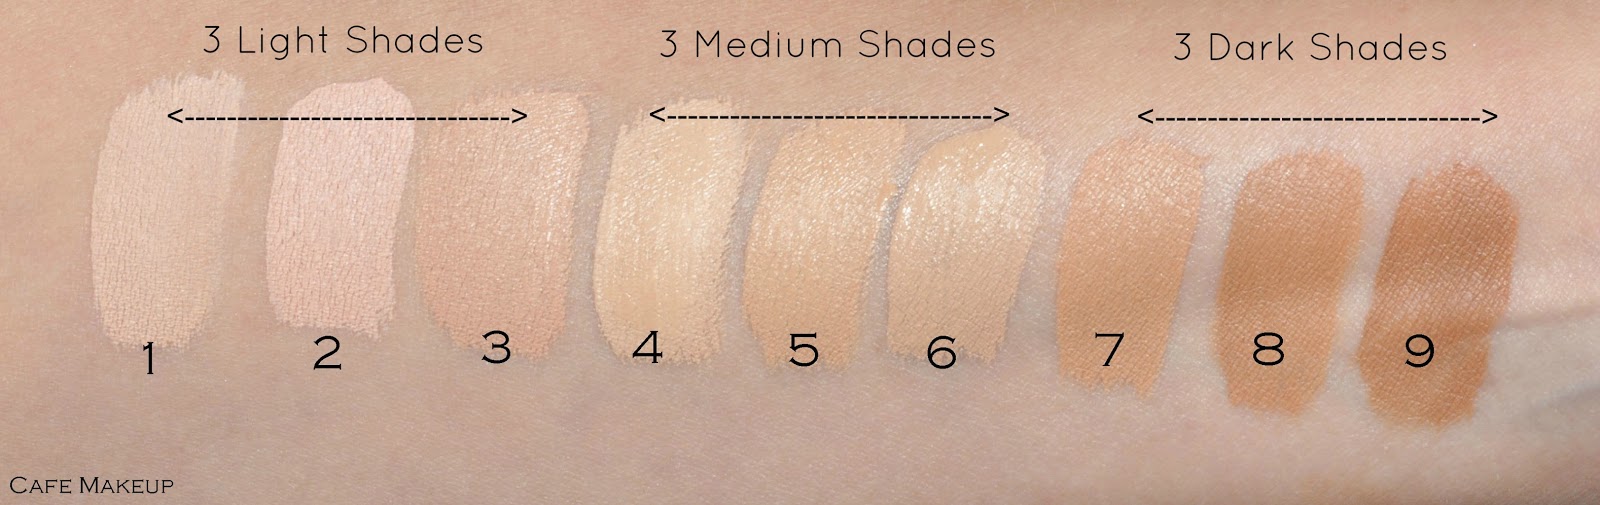 How to Find Your Perfect Foundation Shade